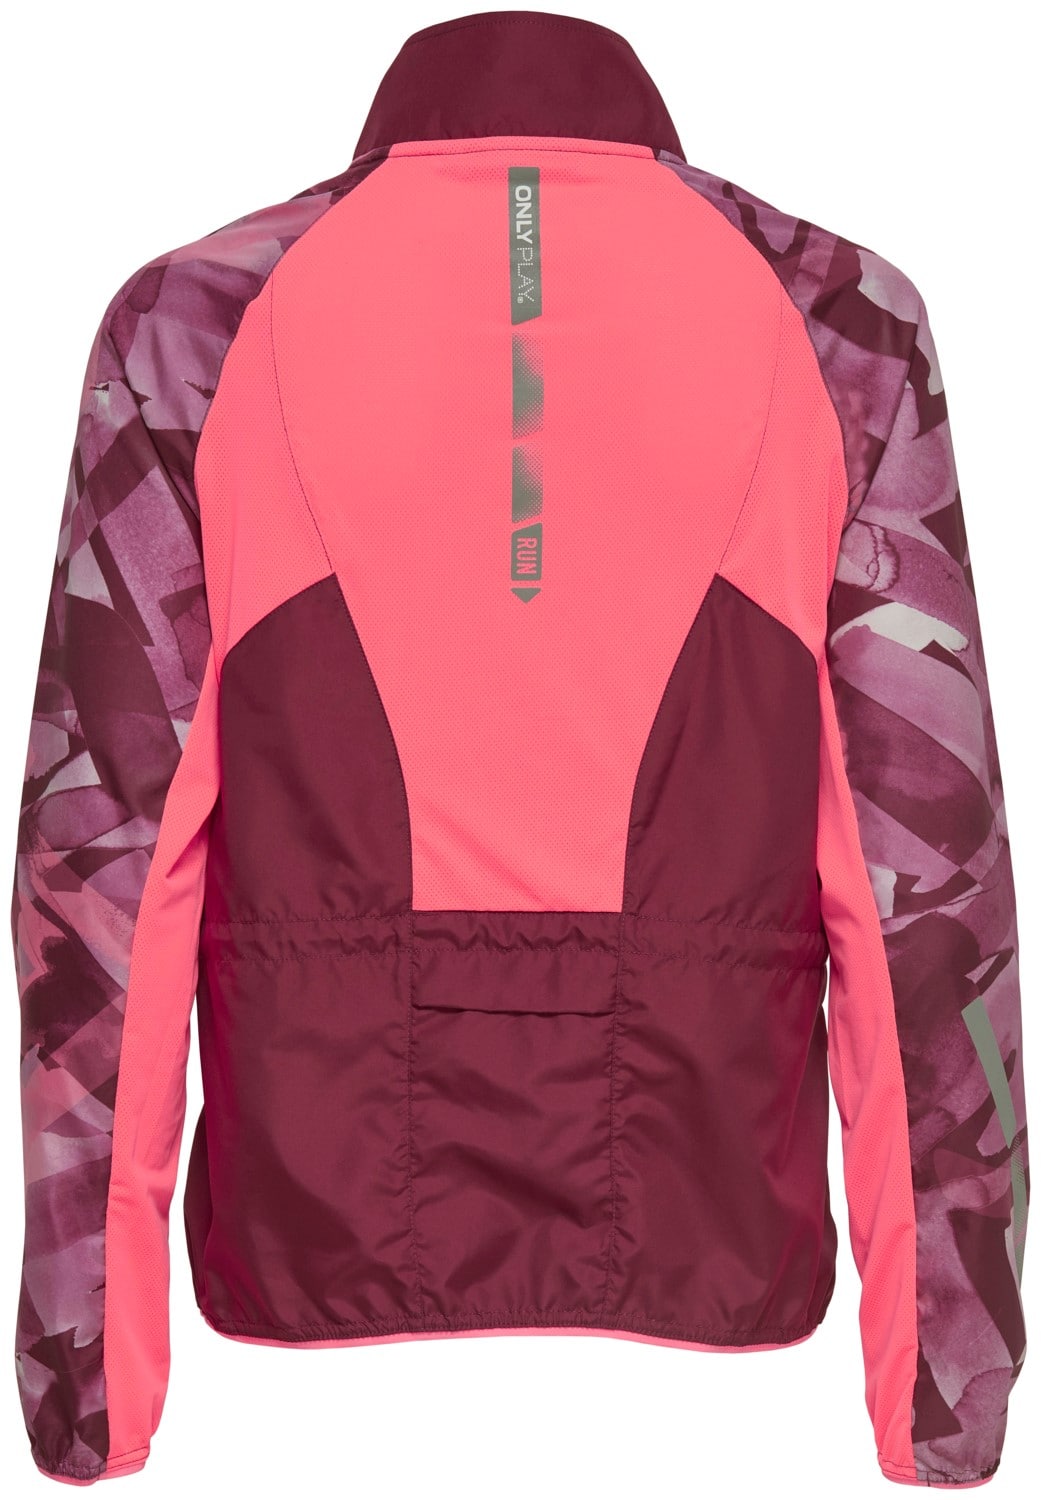 Only Play Dayo Run Jacket 15154477 - Rhododenron d